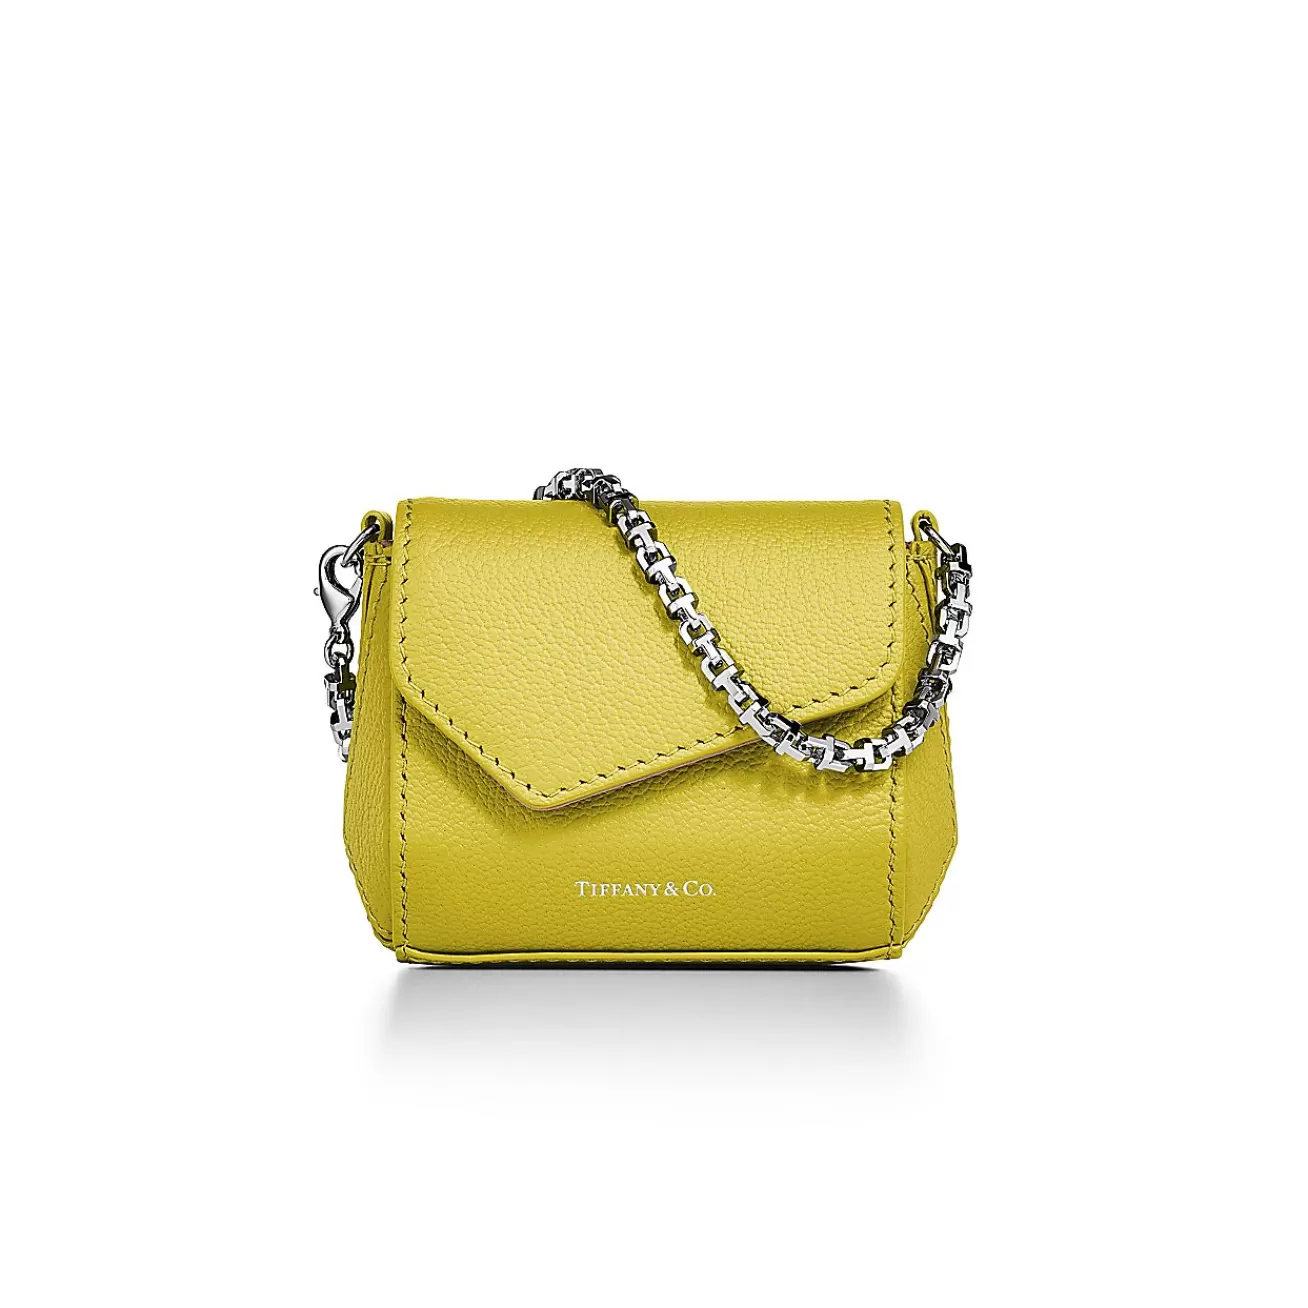 Tiffany & Co. Tiffany T Nano Bag in Citrine Yellow Leather | ^Women Small Leather Goods | Women's Accessories